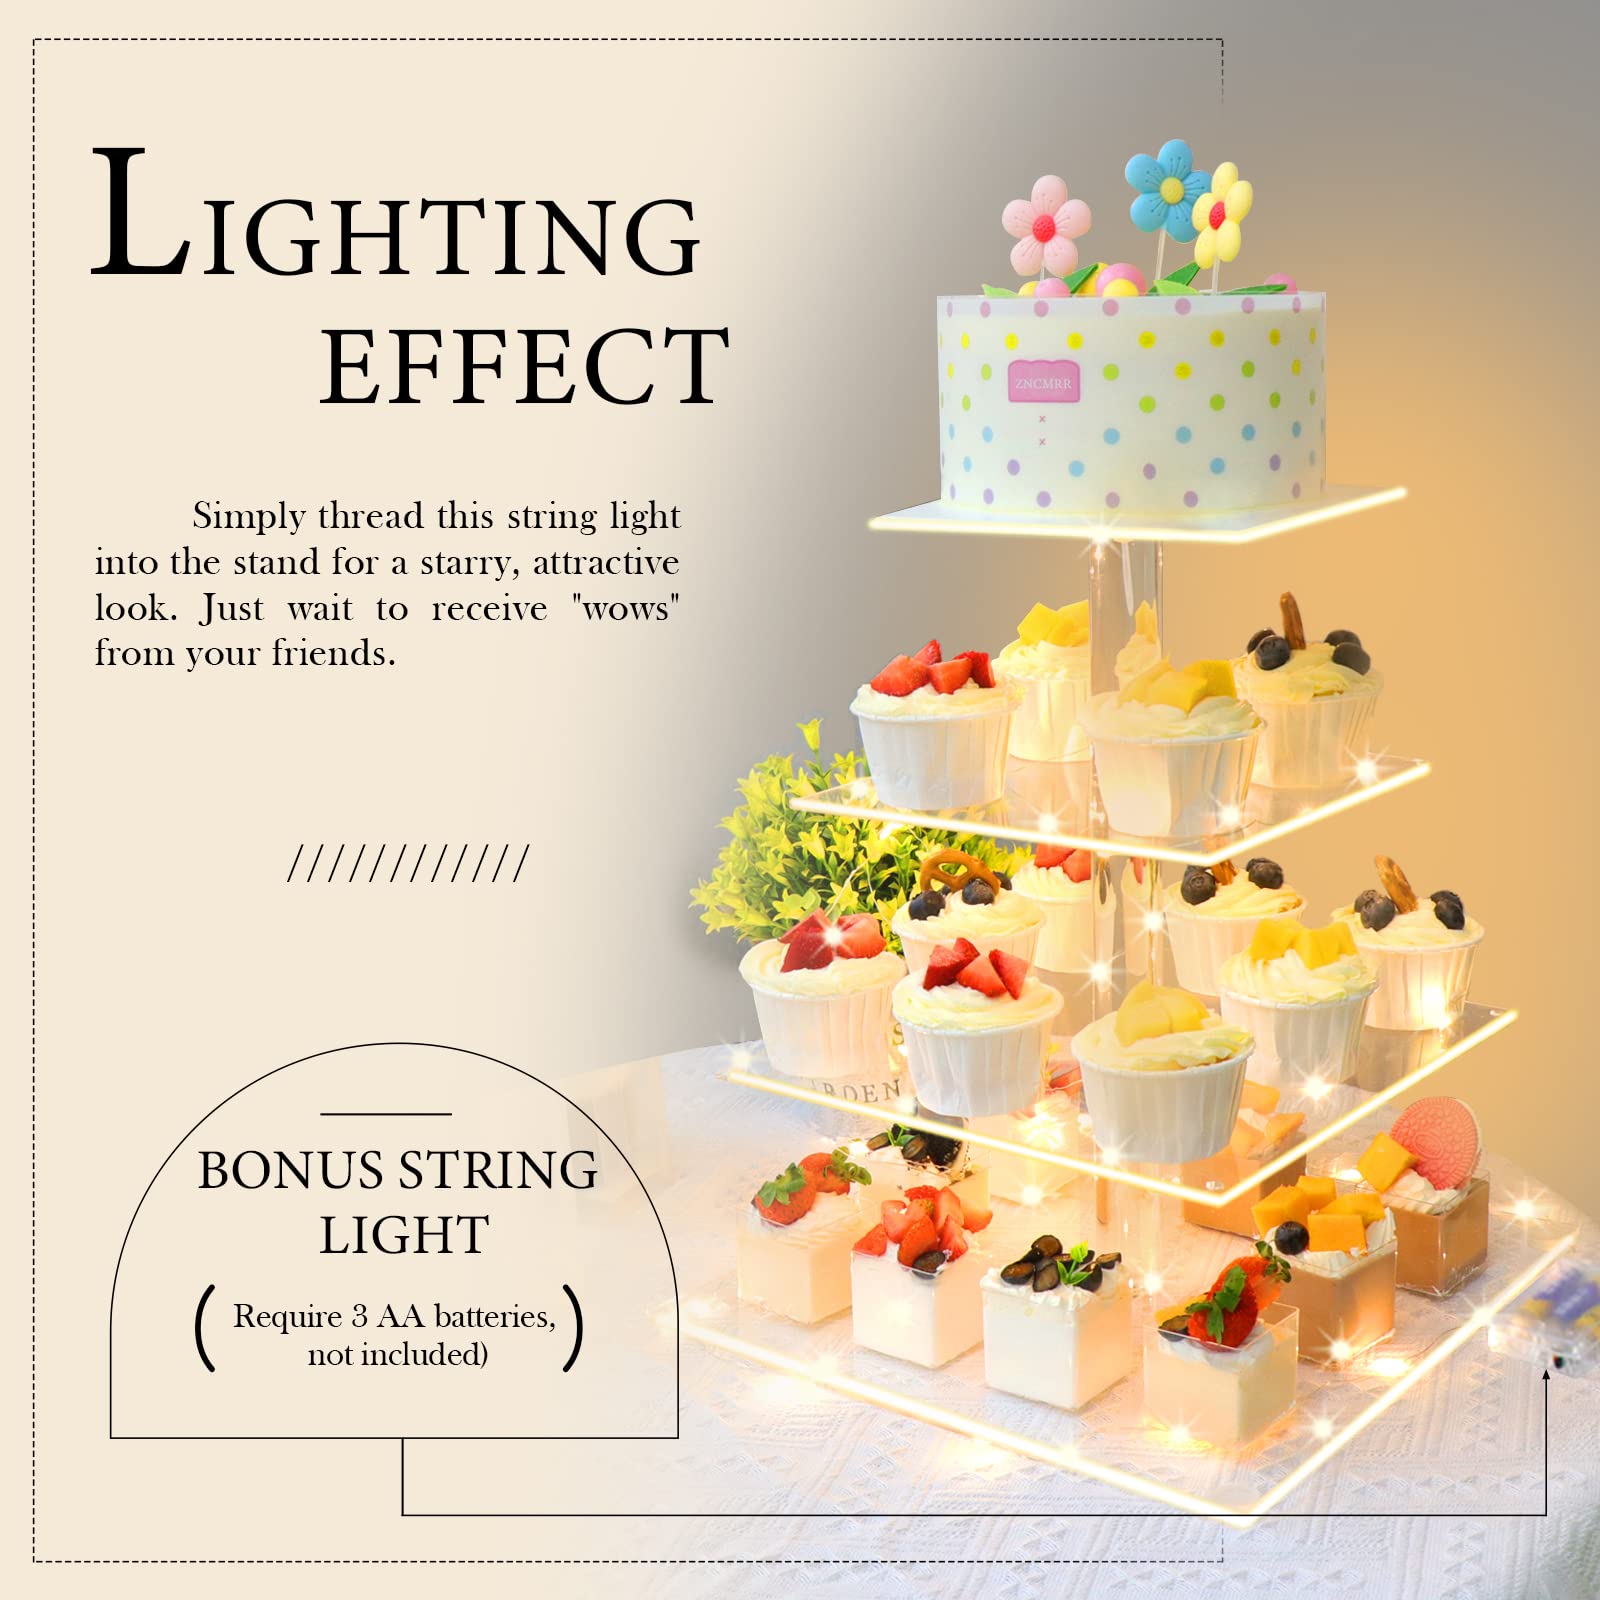 4 Tier Square Acrylic Cupcake Display Stand Holder with LED String Light Pastry Dessert Serving Platter for Birthday or Wedding Party